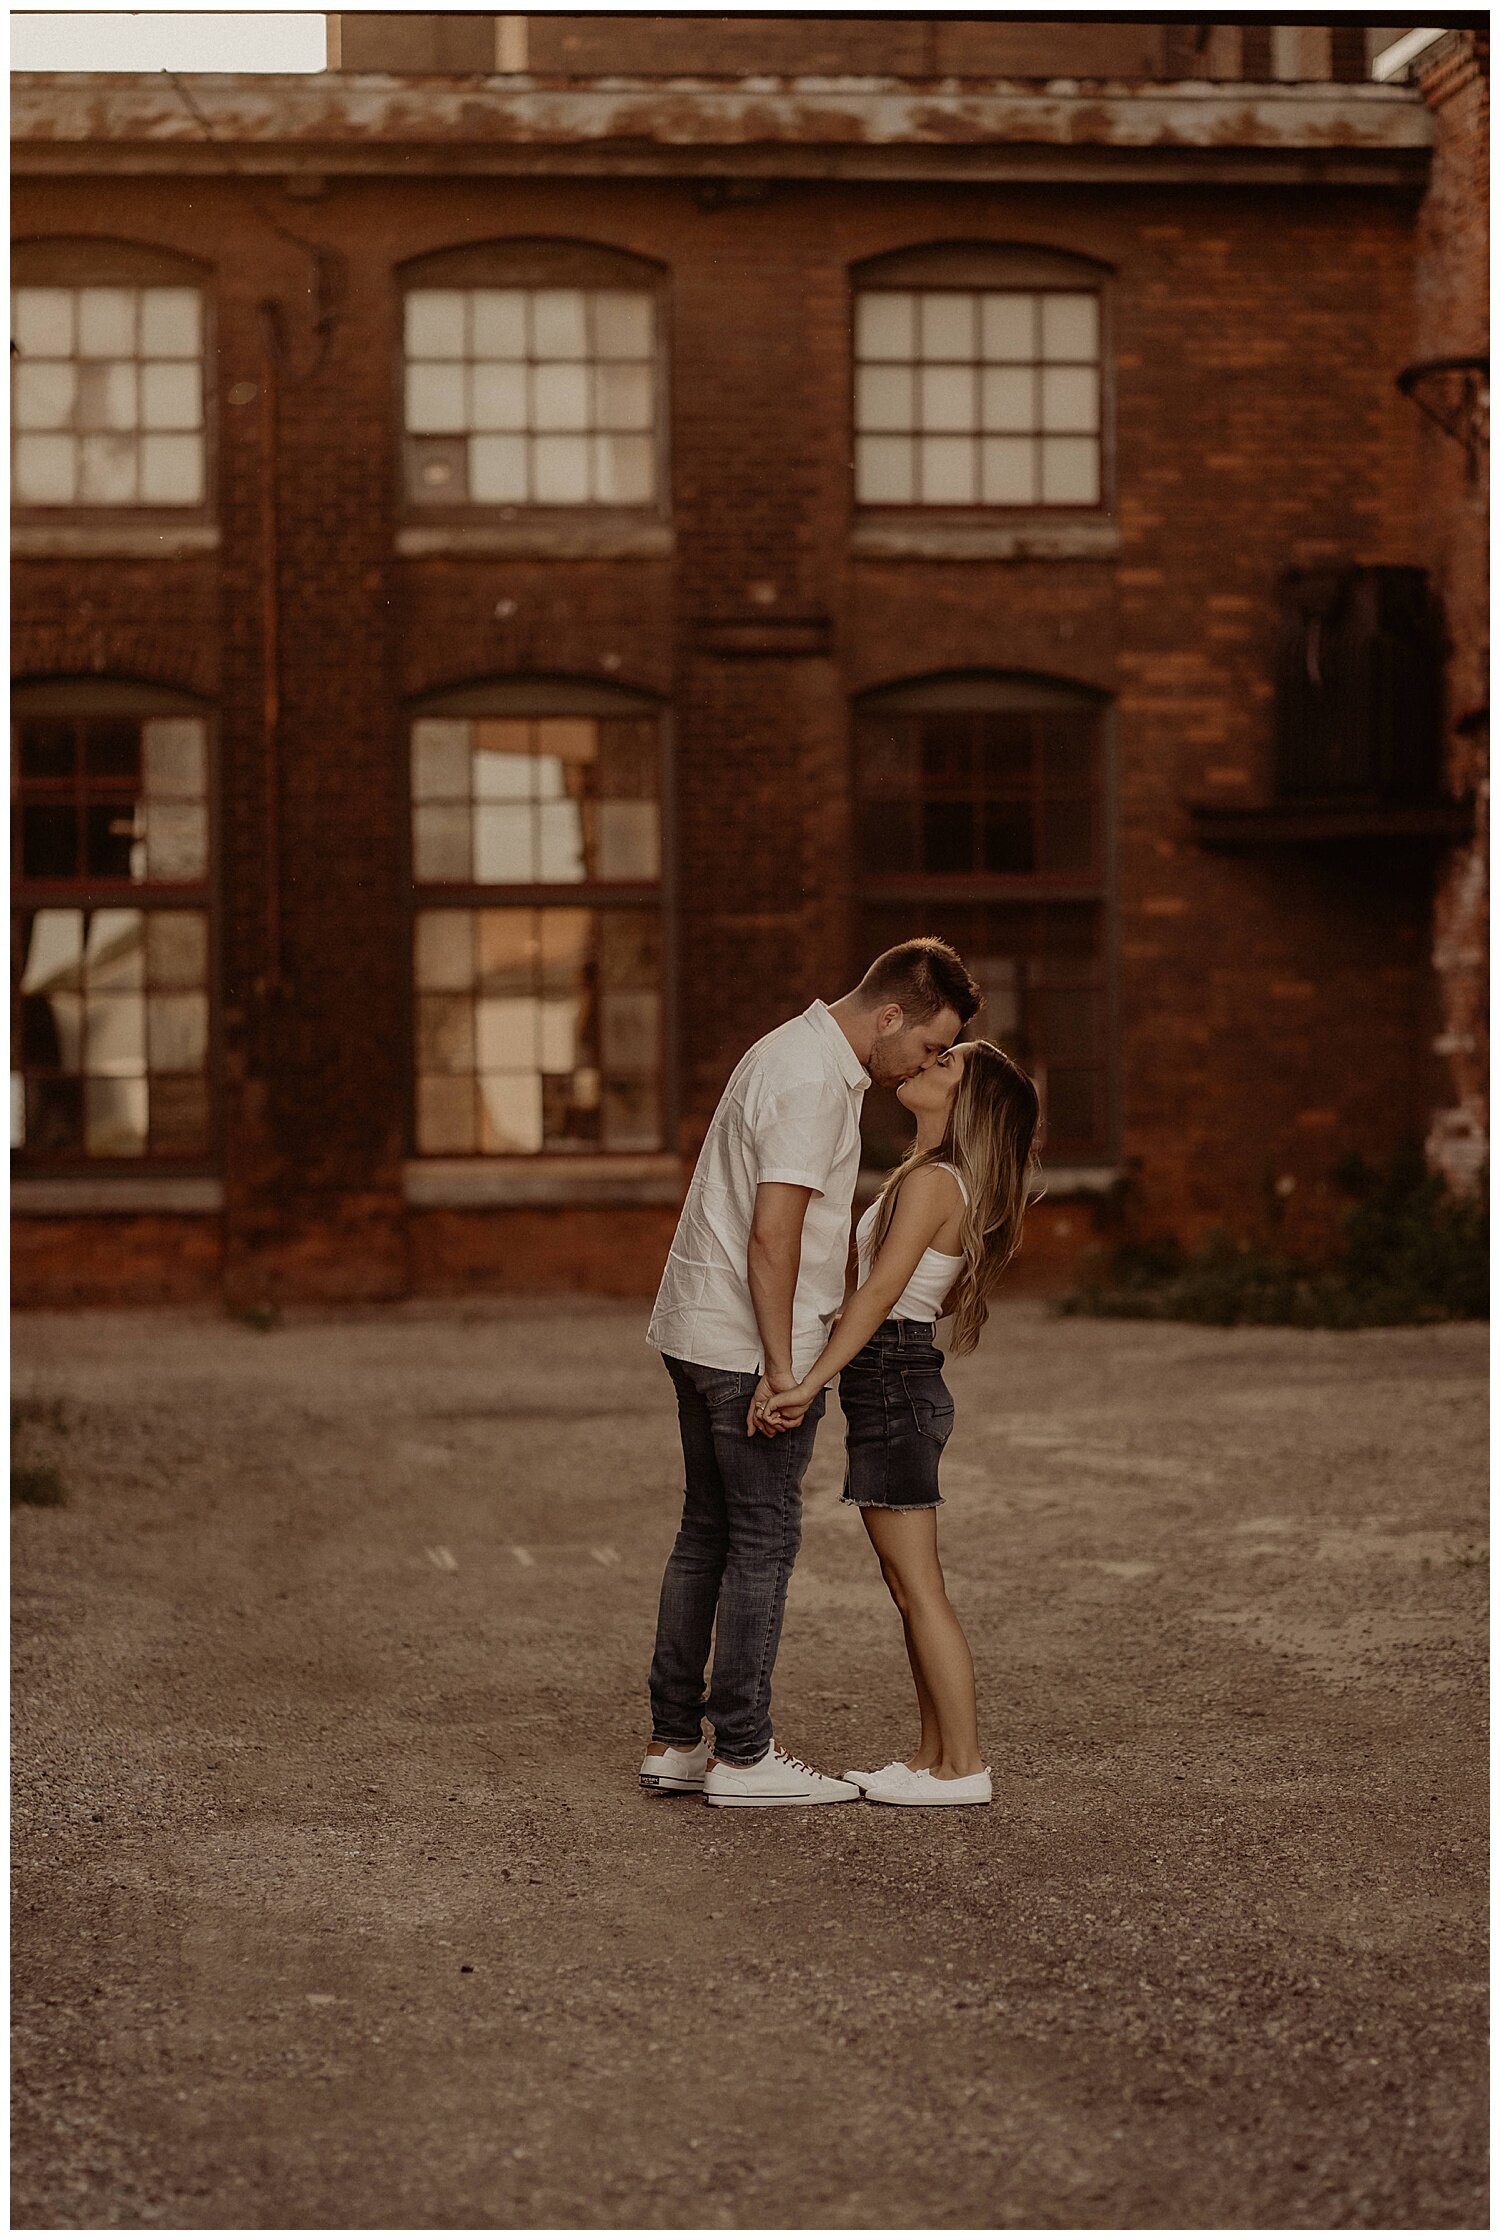 Cotton_Factory_And_Waterfall_Engagement_Session_Hamilton_Ontario_Wedding_Photographer_0009.jpg